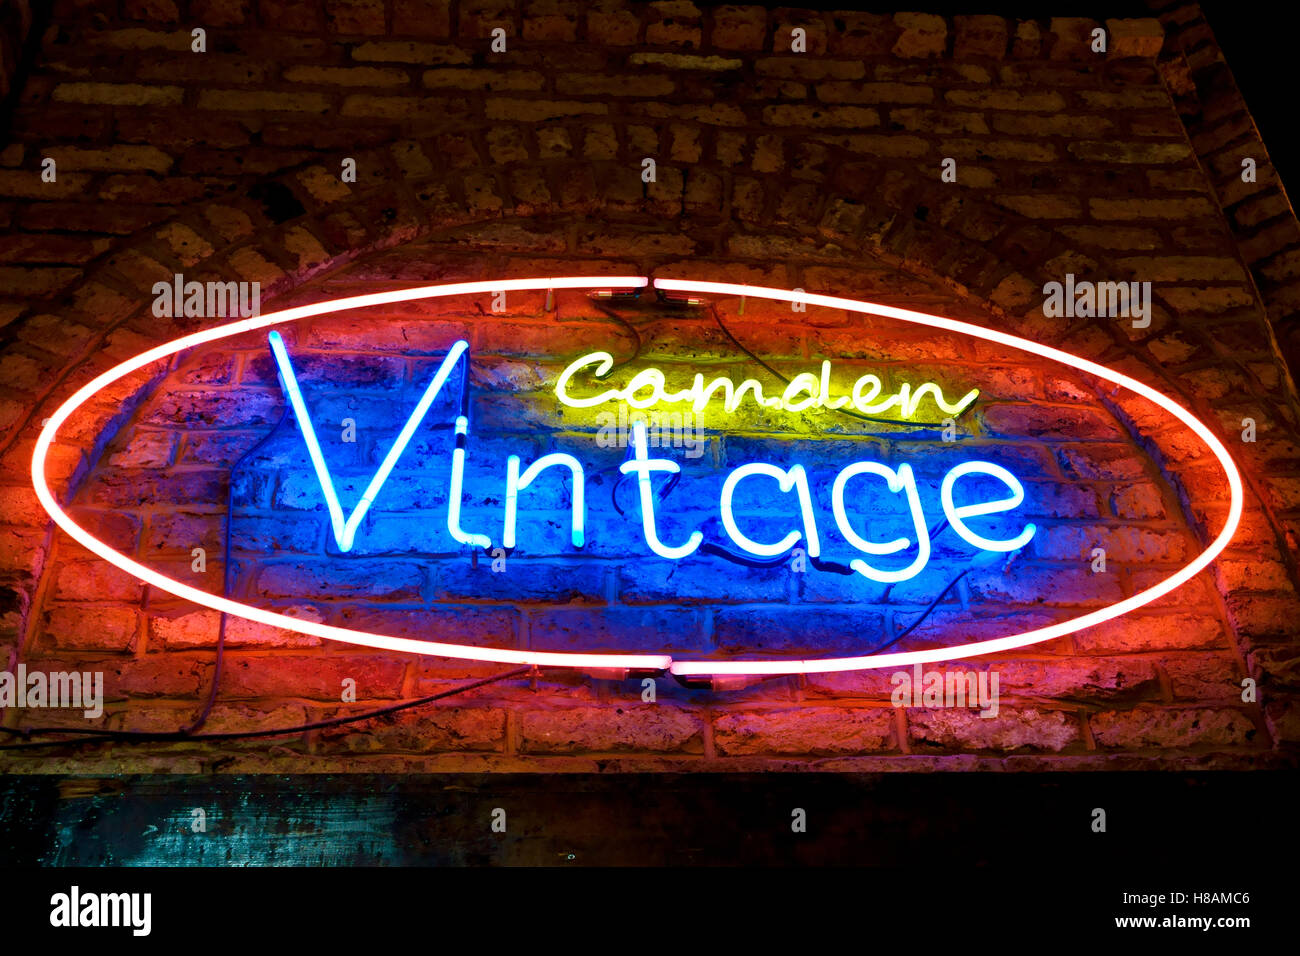 Camden Vintage neon sign outside stall in Camden Stables Market, Camden Town, London, England, Great Britain, United Kingdom, UK, Europe Stock Photo